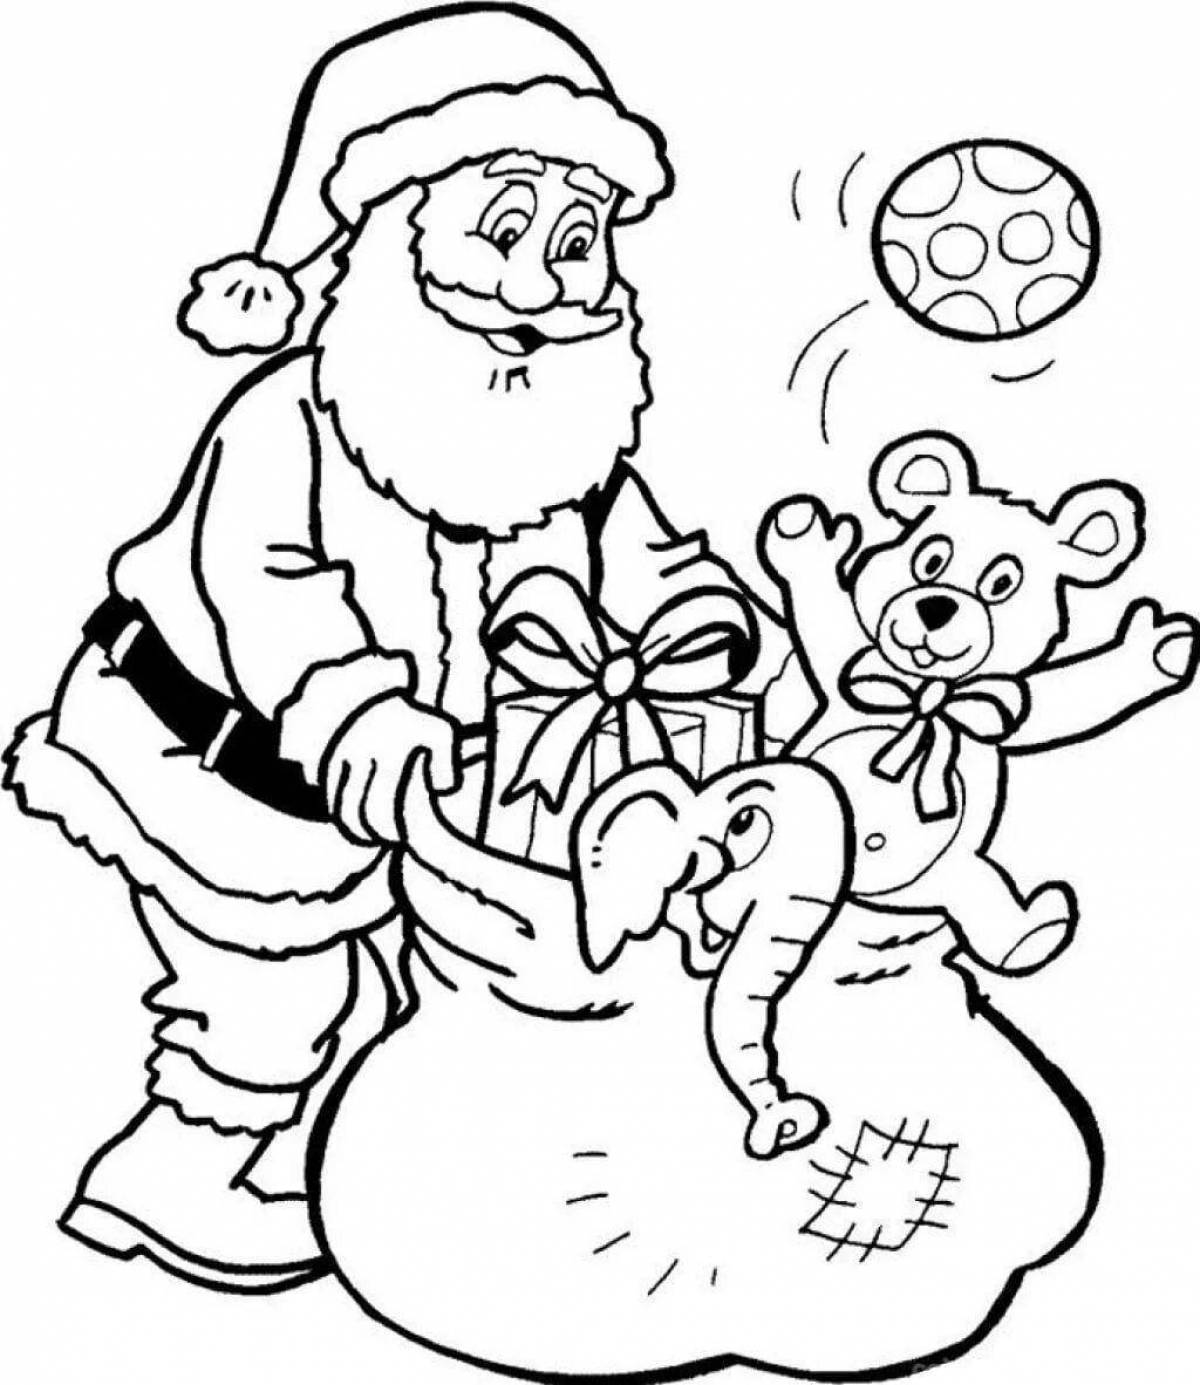 Coloring book gorgeous Santa Claus with a bag